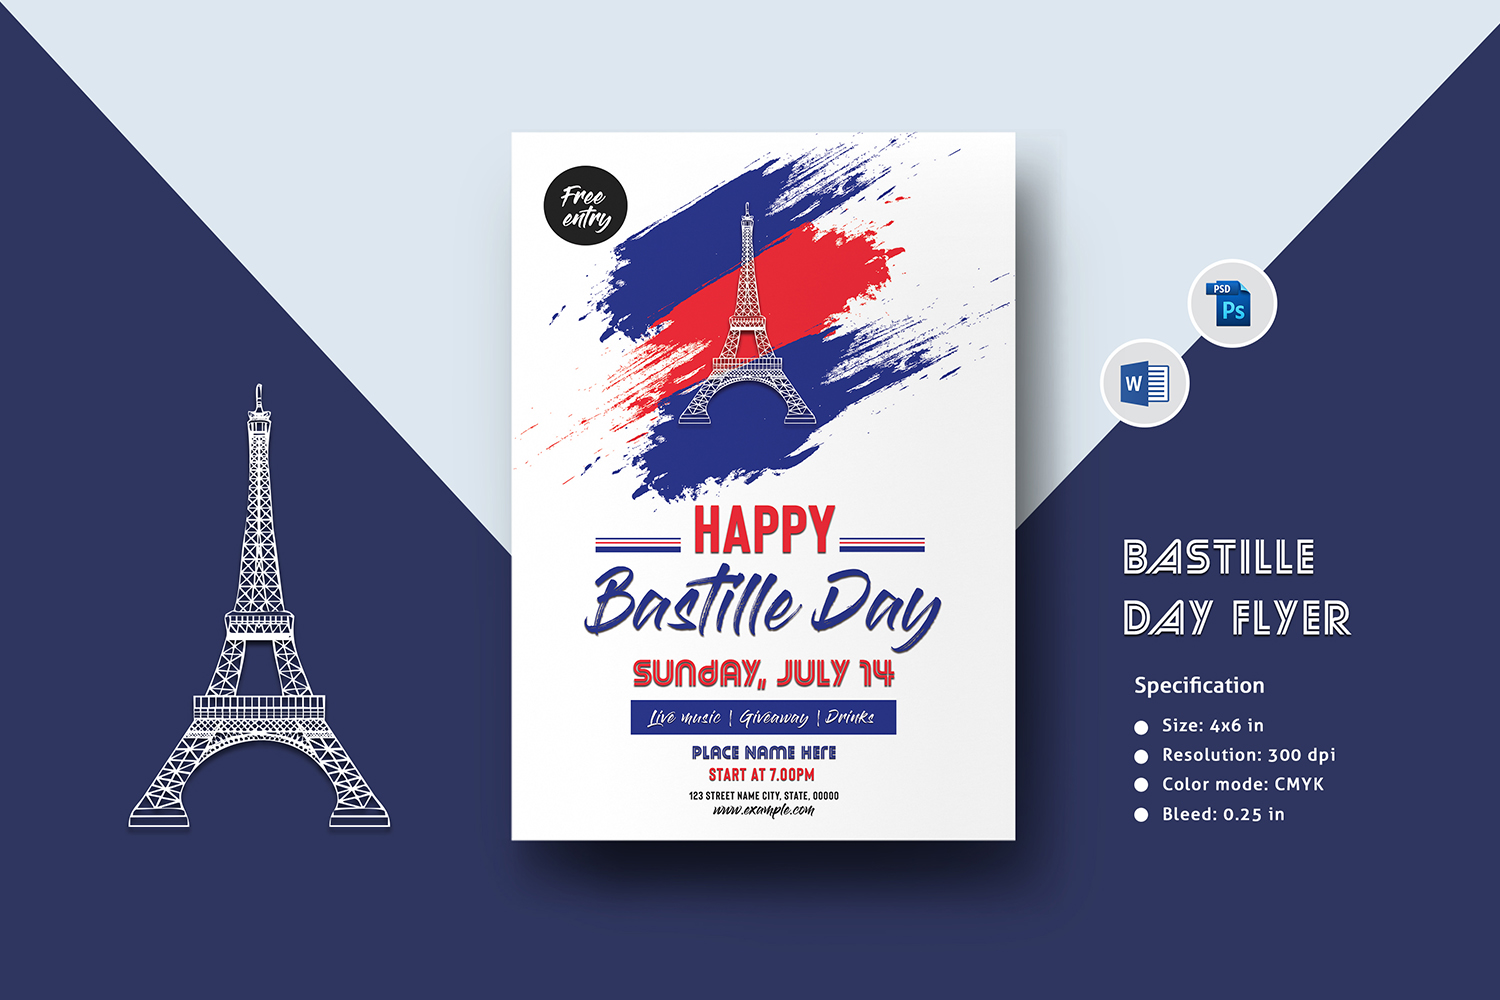 Bastille Day Flyer Corporate Identity Template